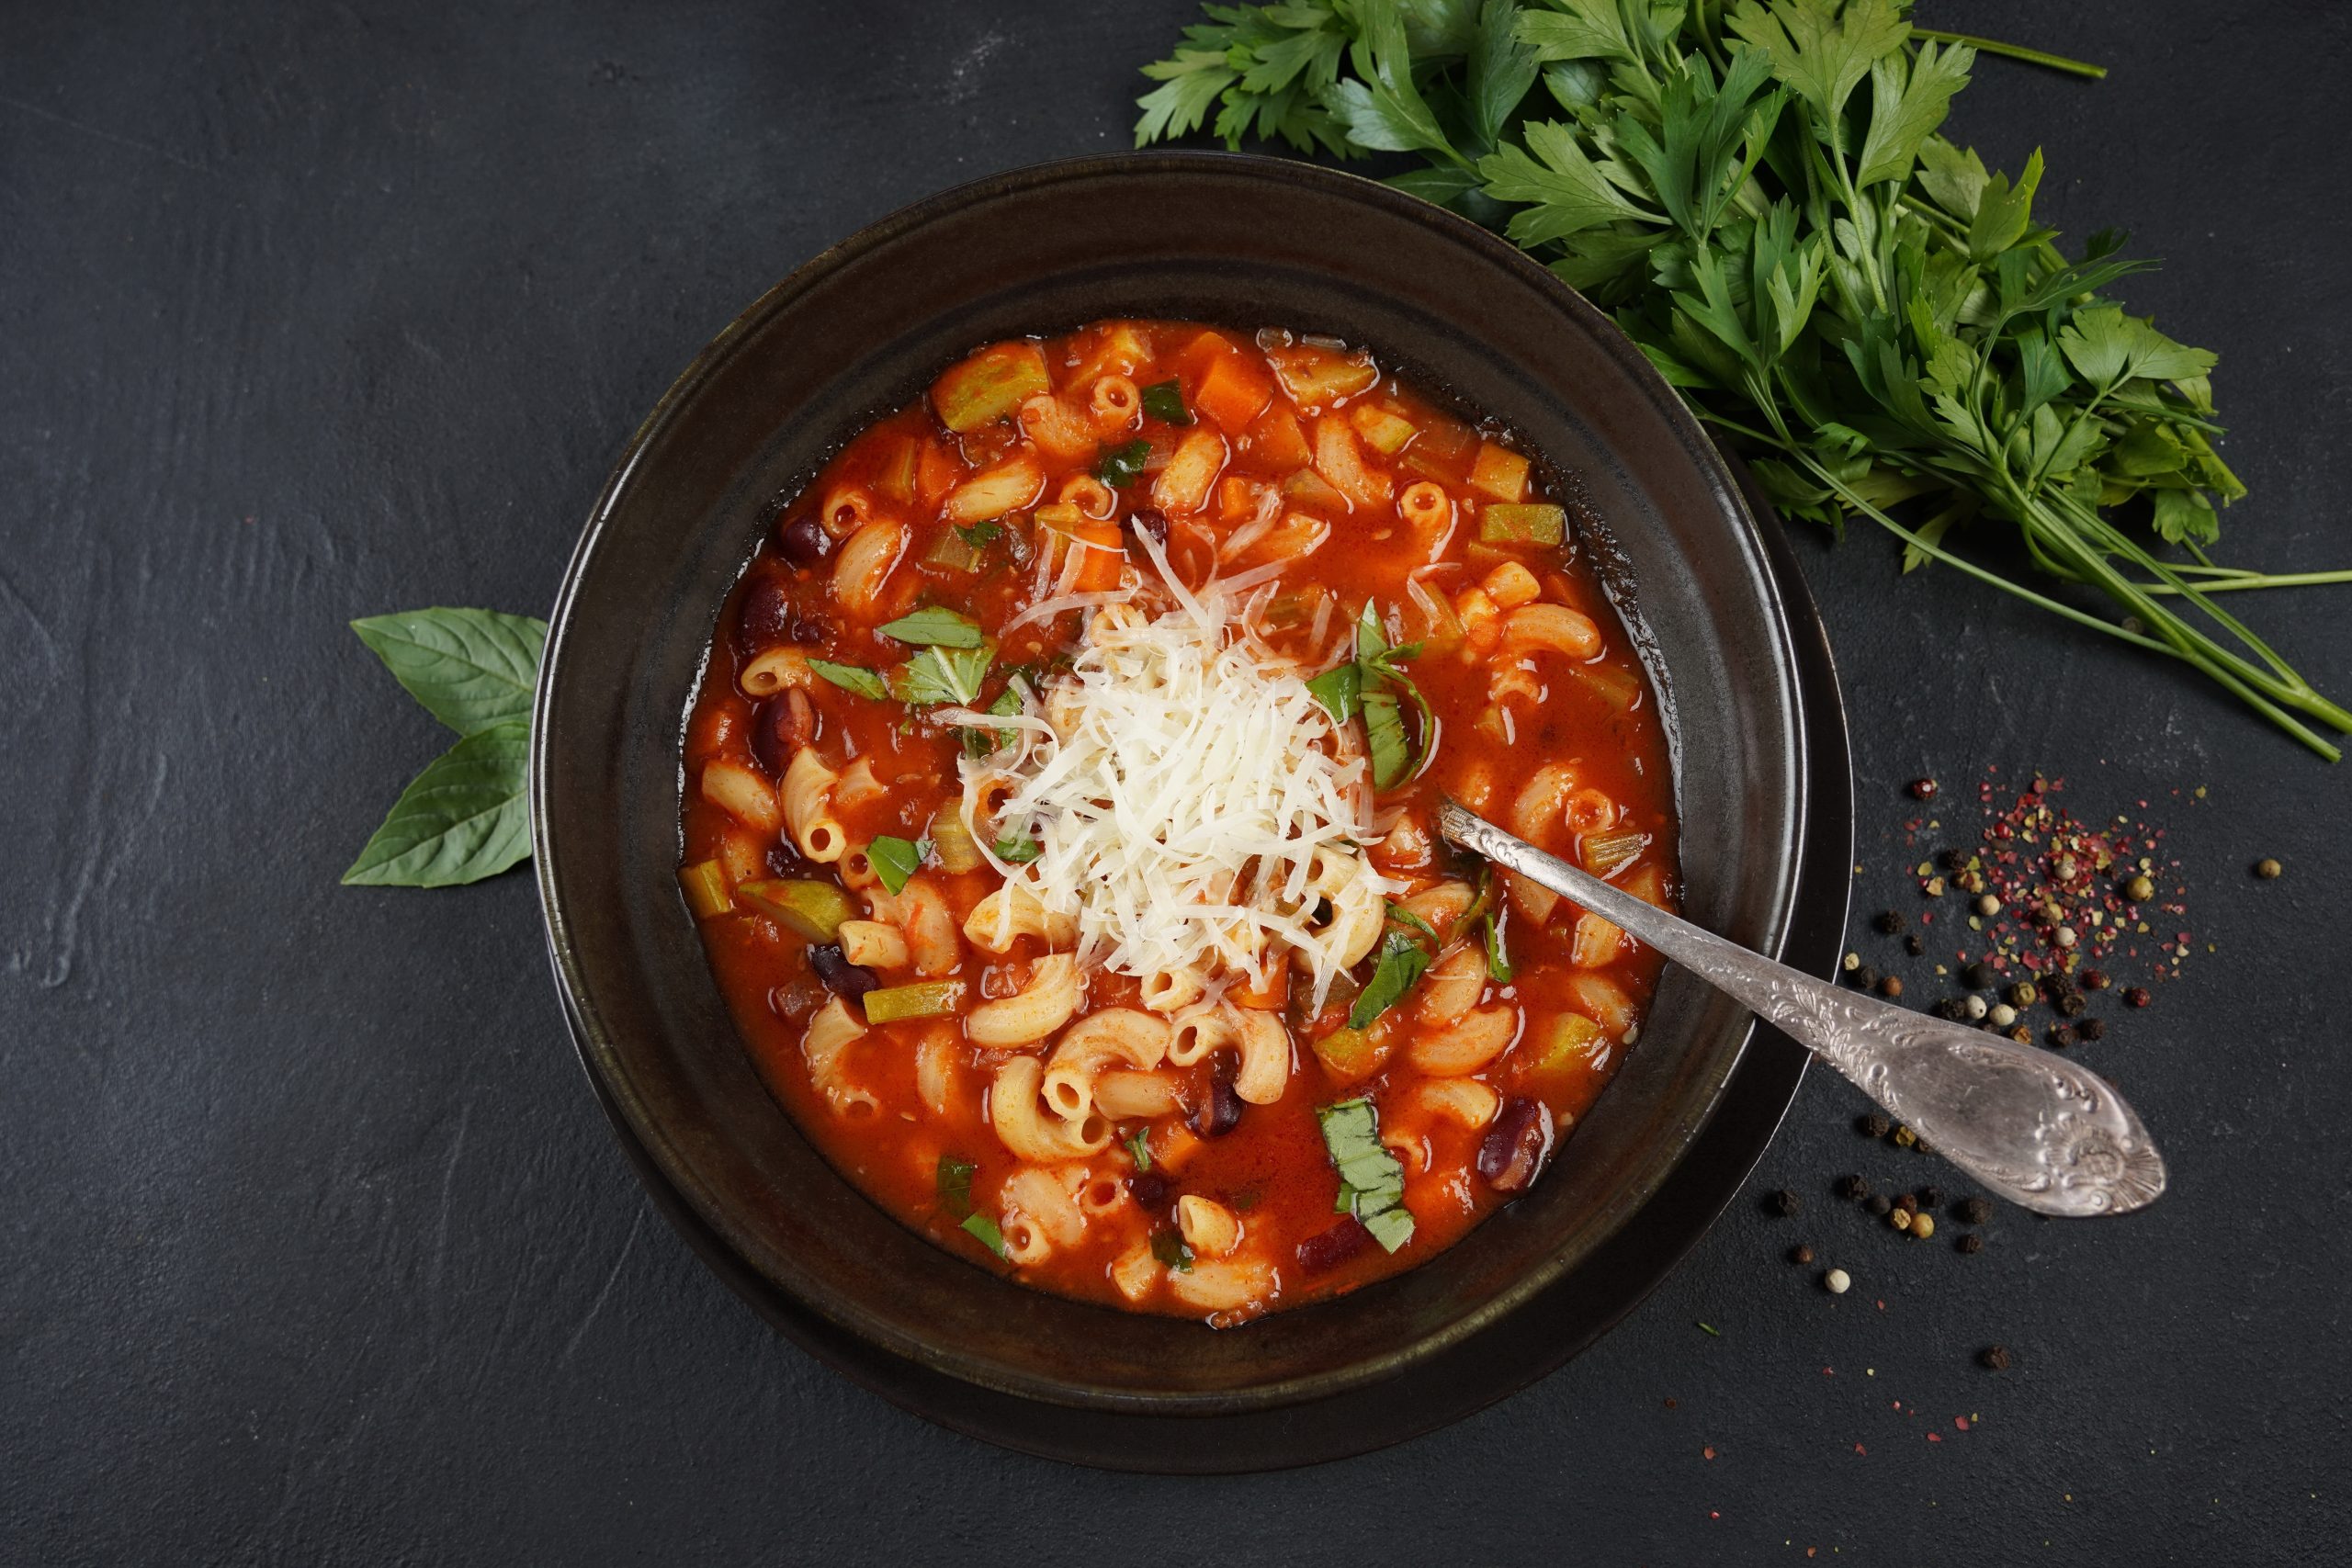 Fuel your movement recipe of the month: Minestrone soup